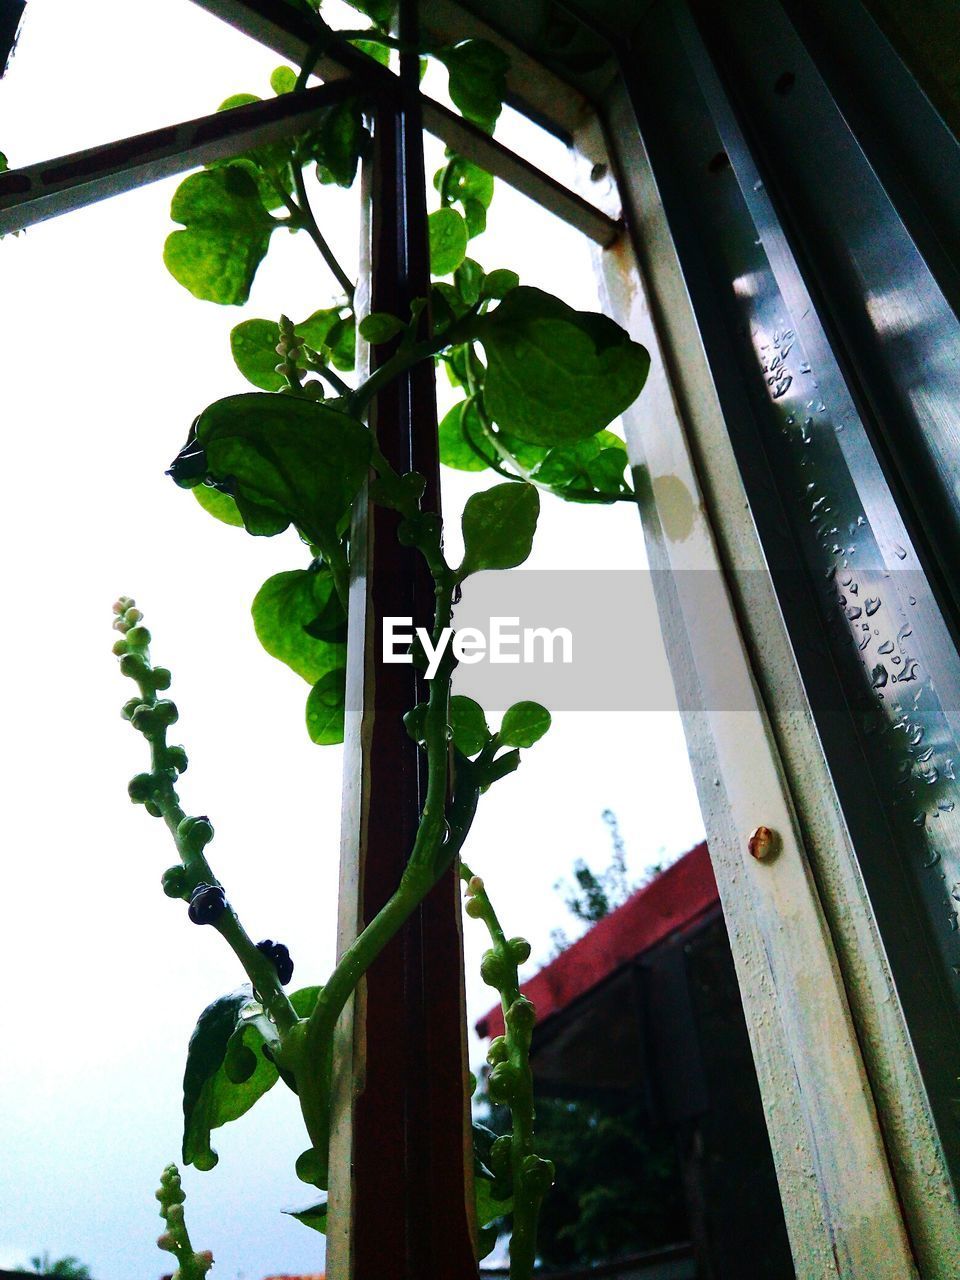 LOW ANGLE VIEW OF PLANT HANGING ON WINDOW